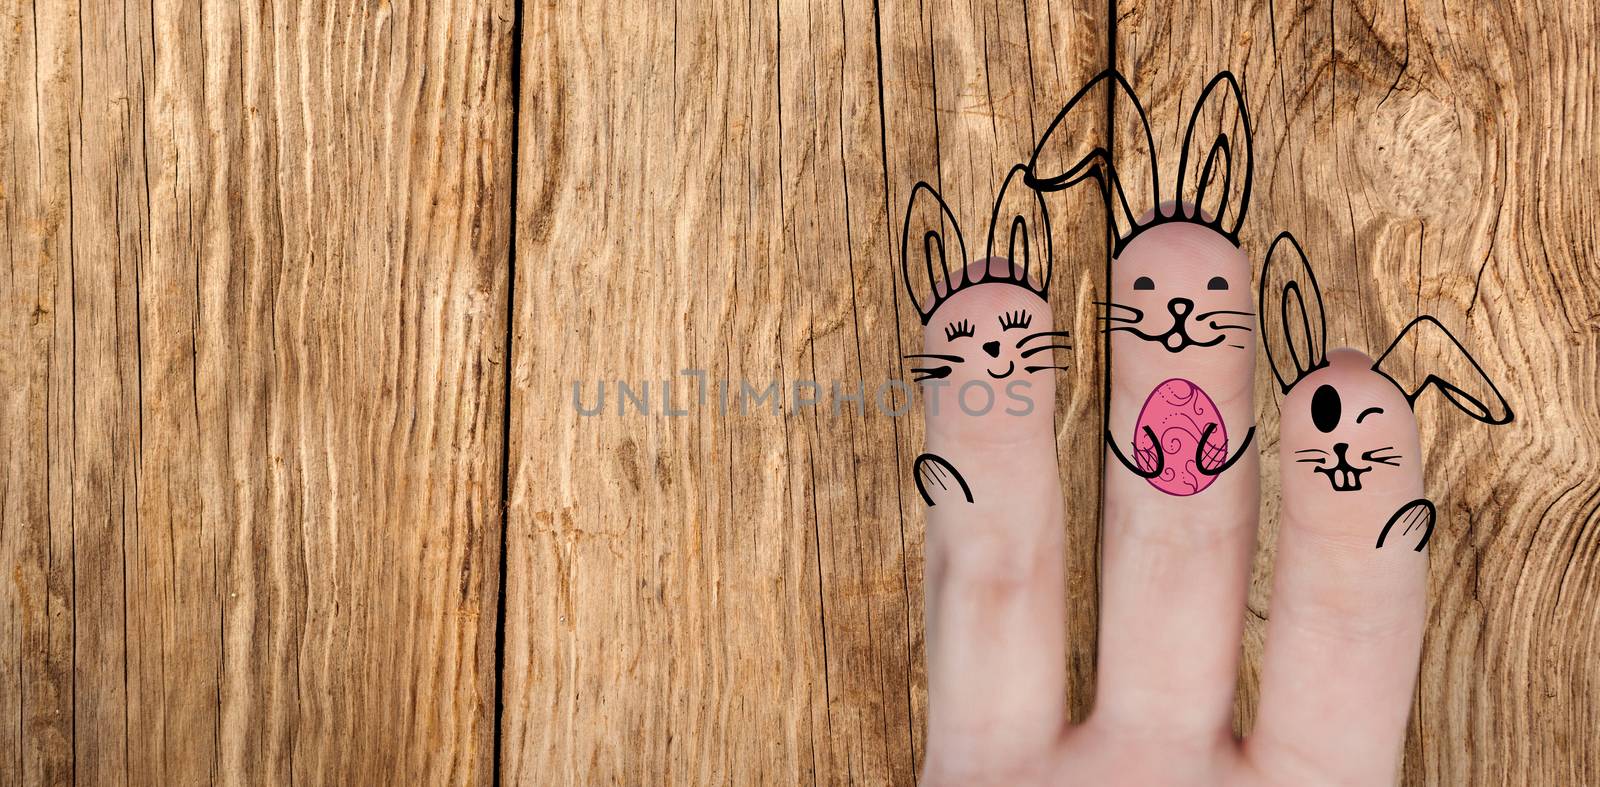 Vector image of fingers painted as Easter bunny  against close-up of wooden texture